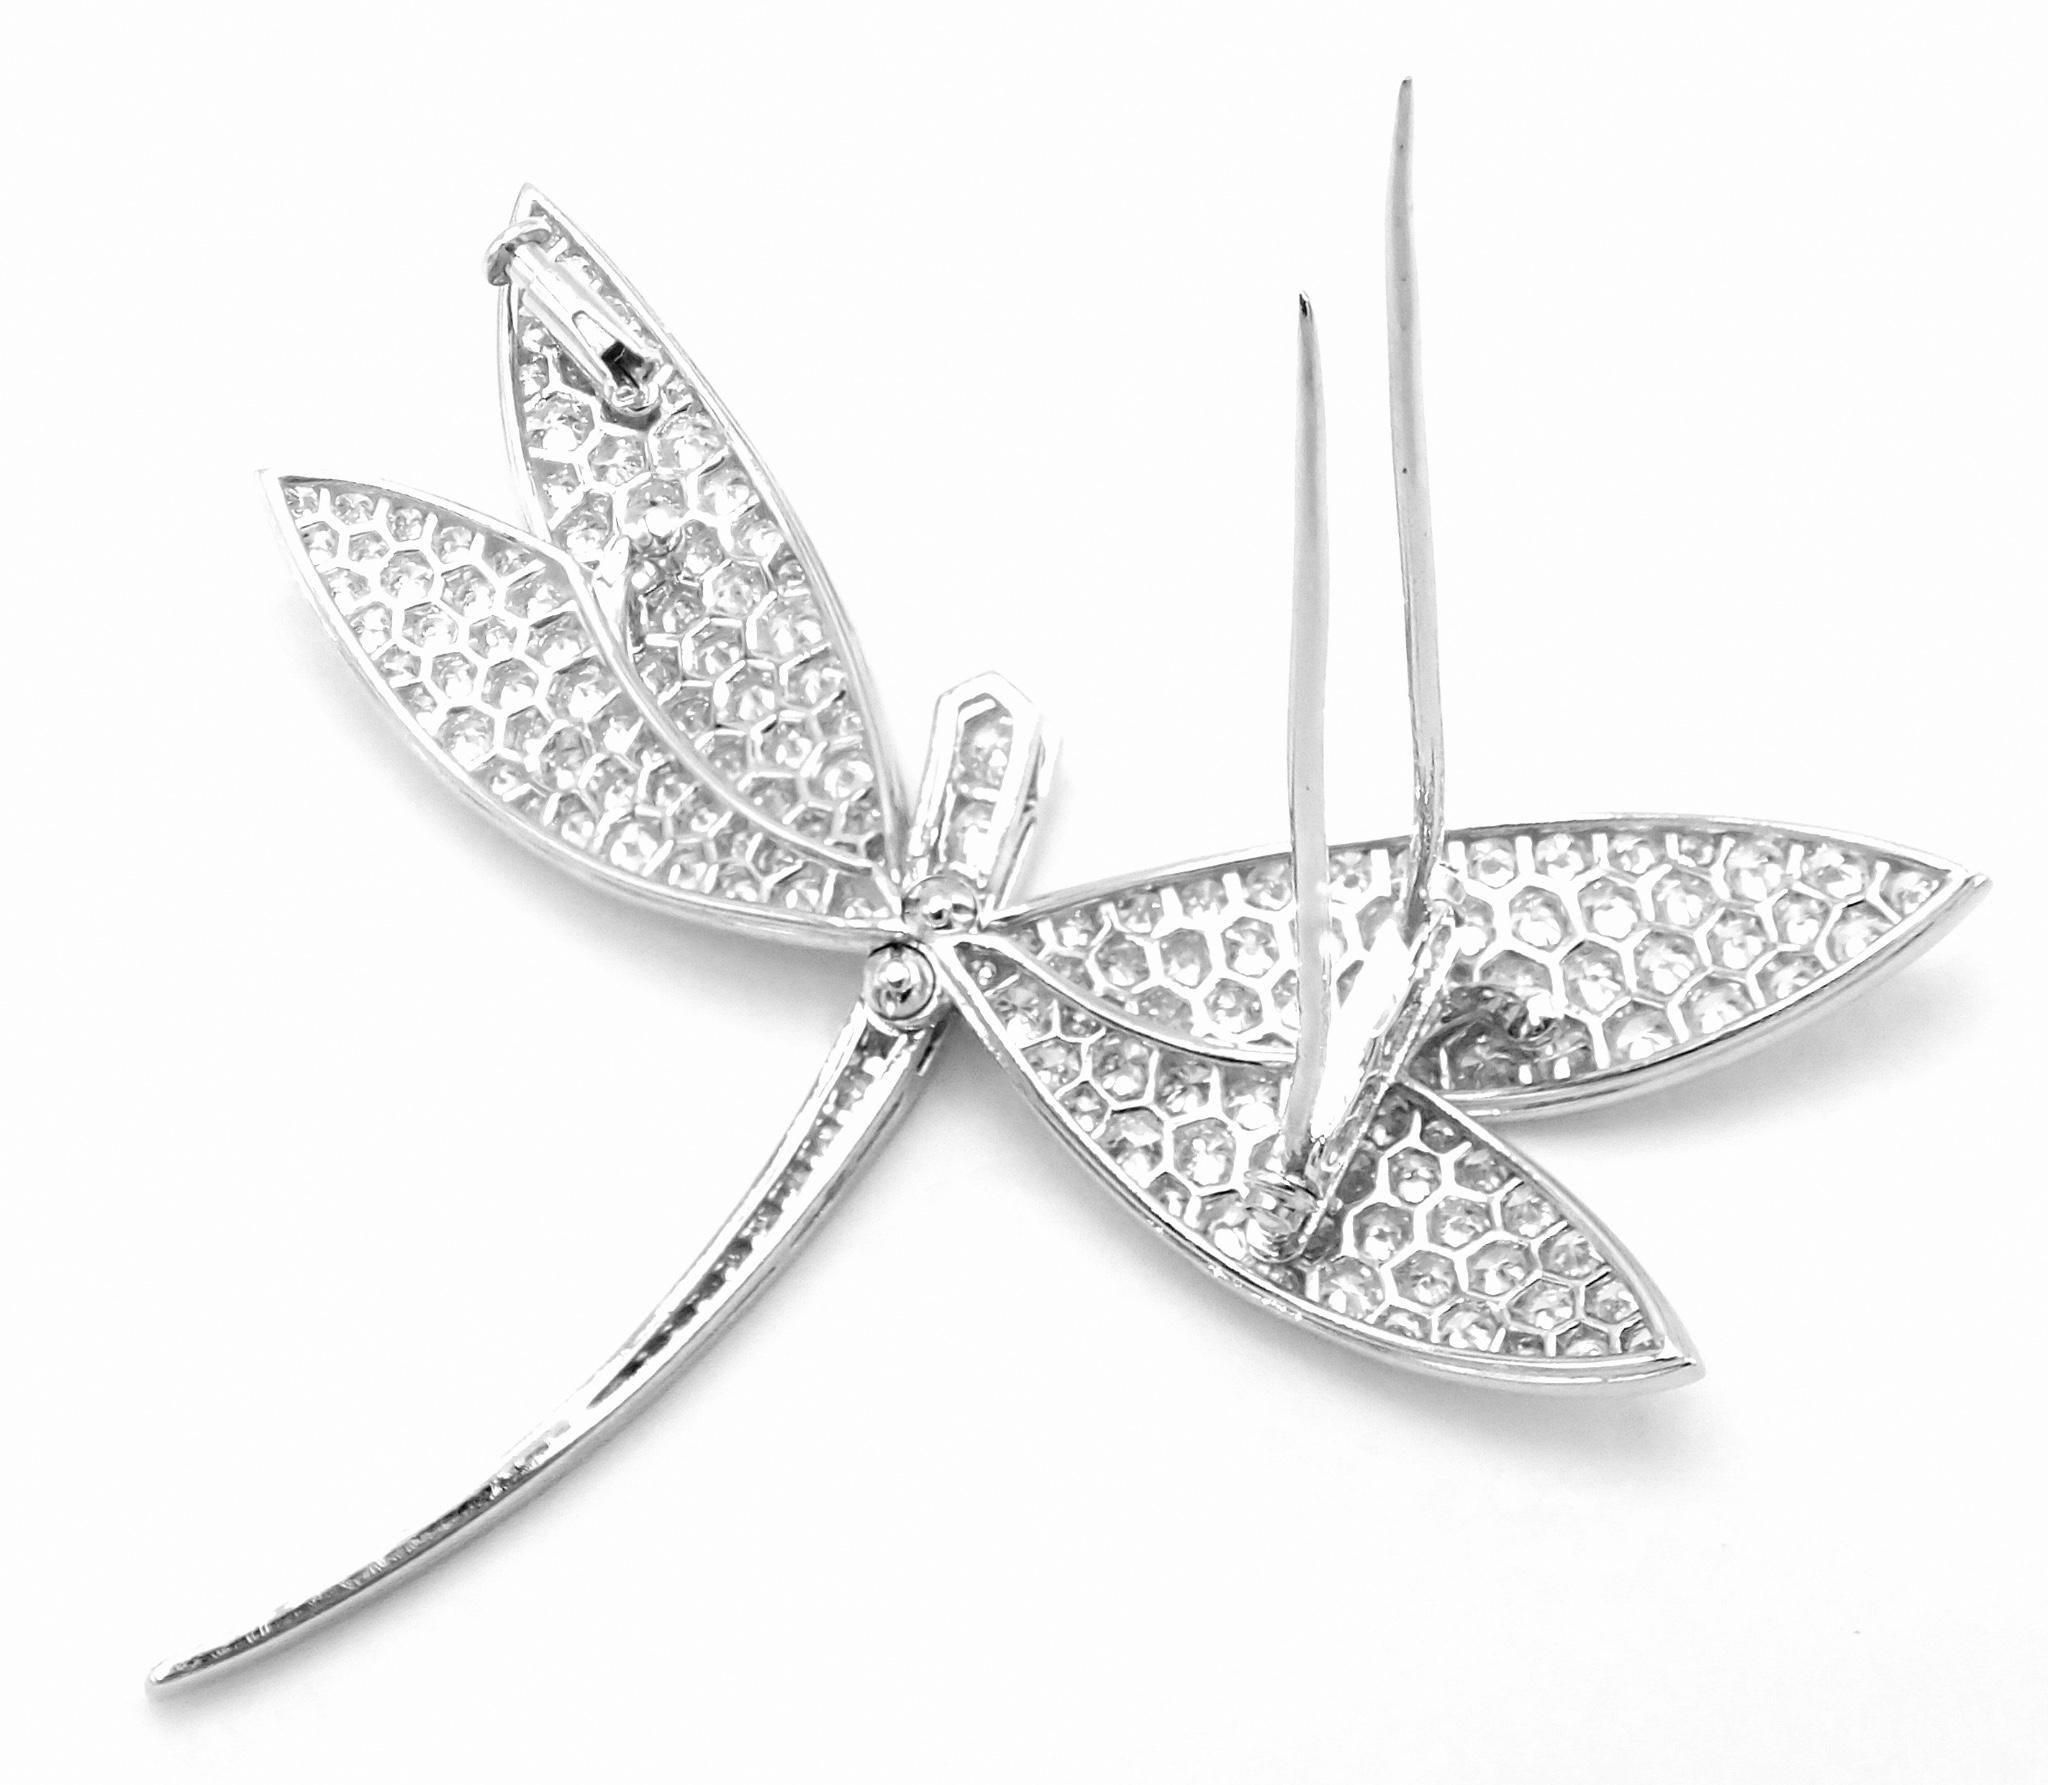 Van Cleef & Arpels Dragonfly Diamond Extra Large White Gold Pin Brooch 3